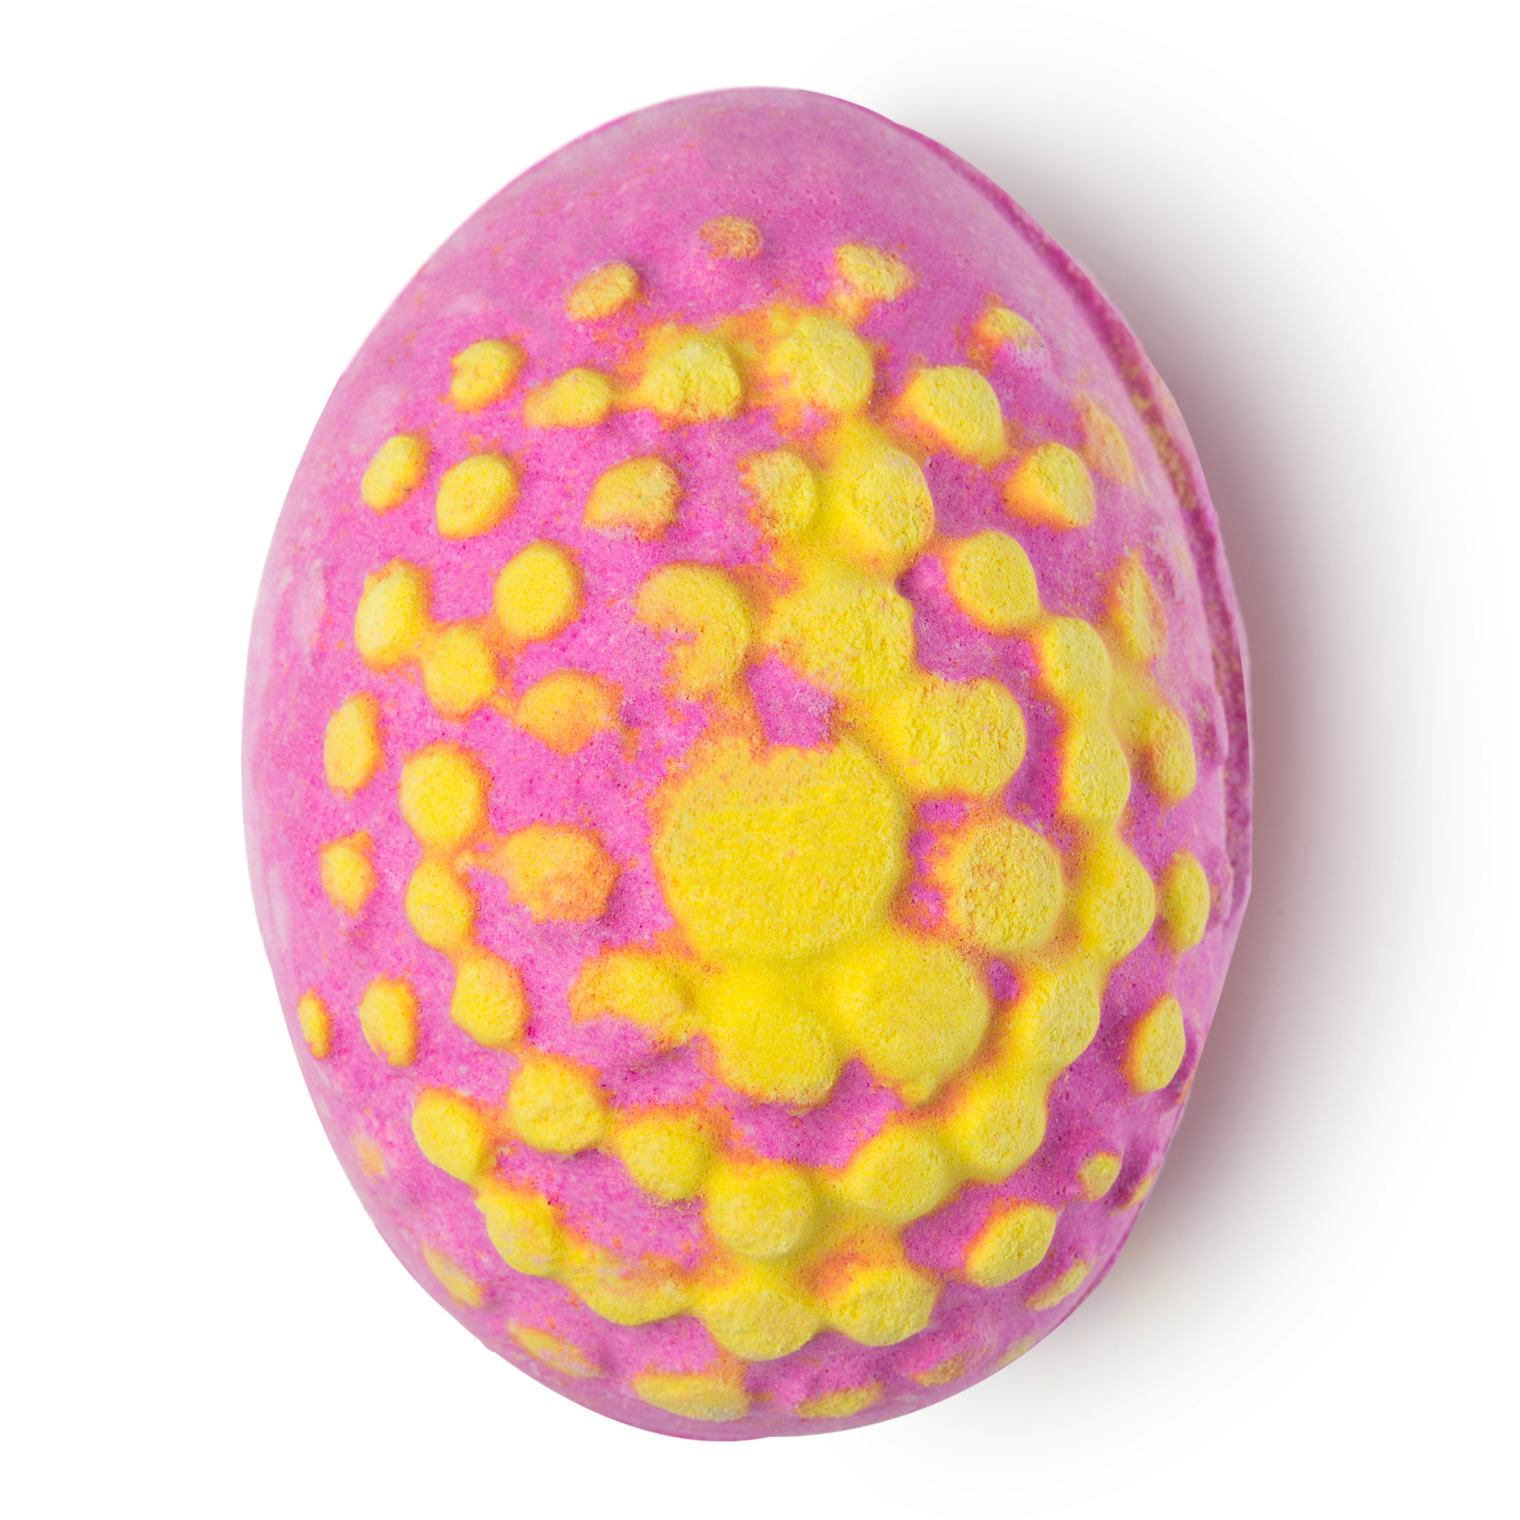 What Is In Lush's Easter Collection? The Golden Egg Bath Bomb Is The